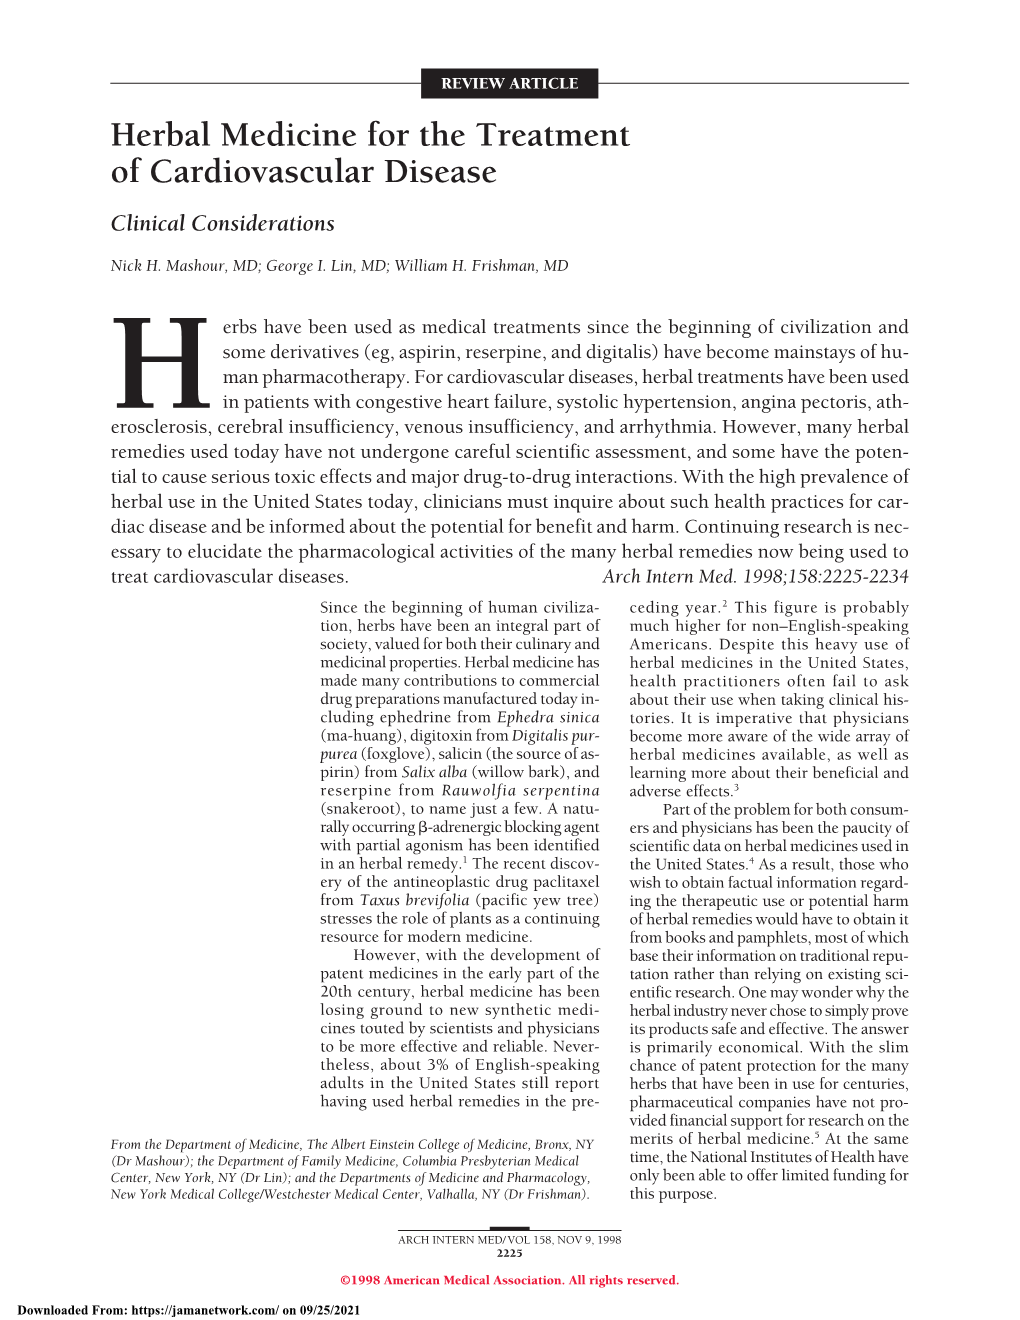 Herbal Medicine for the Treatment of Cardiovascular Disease Clinical Considerations